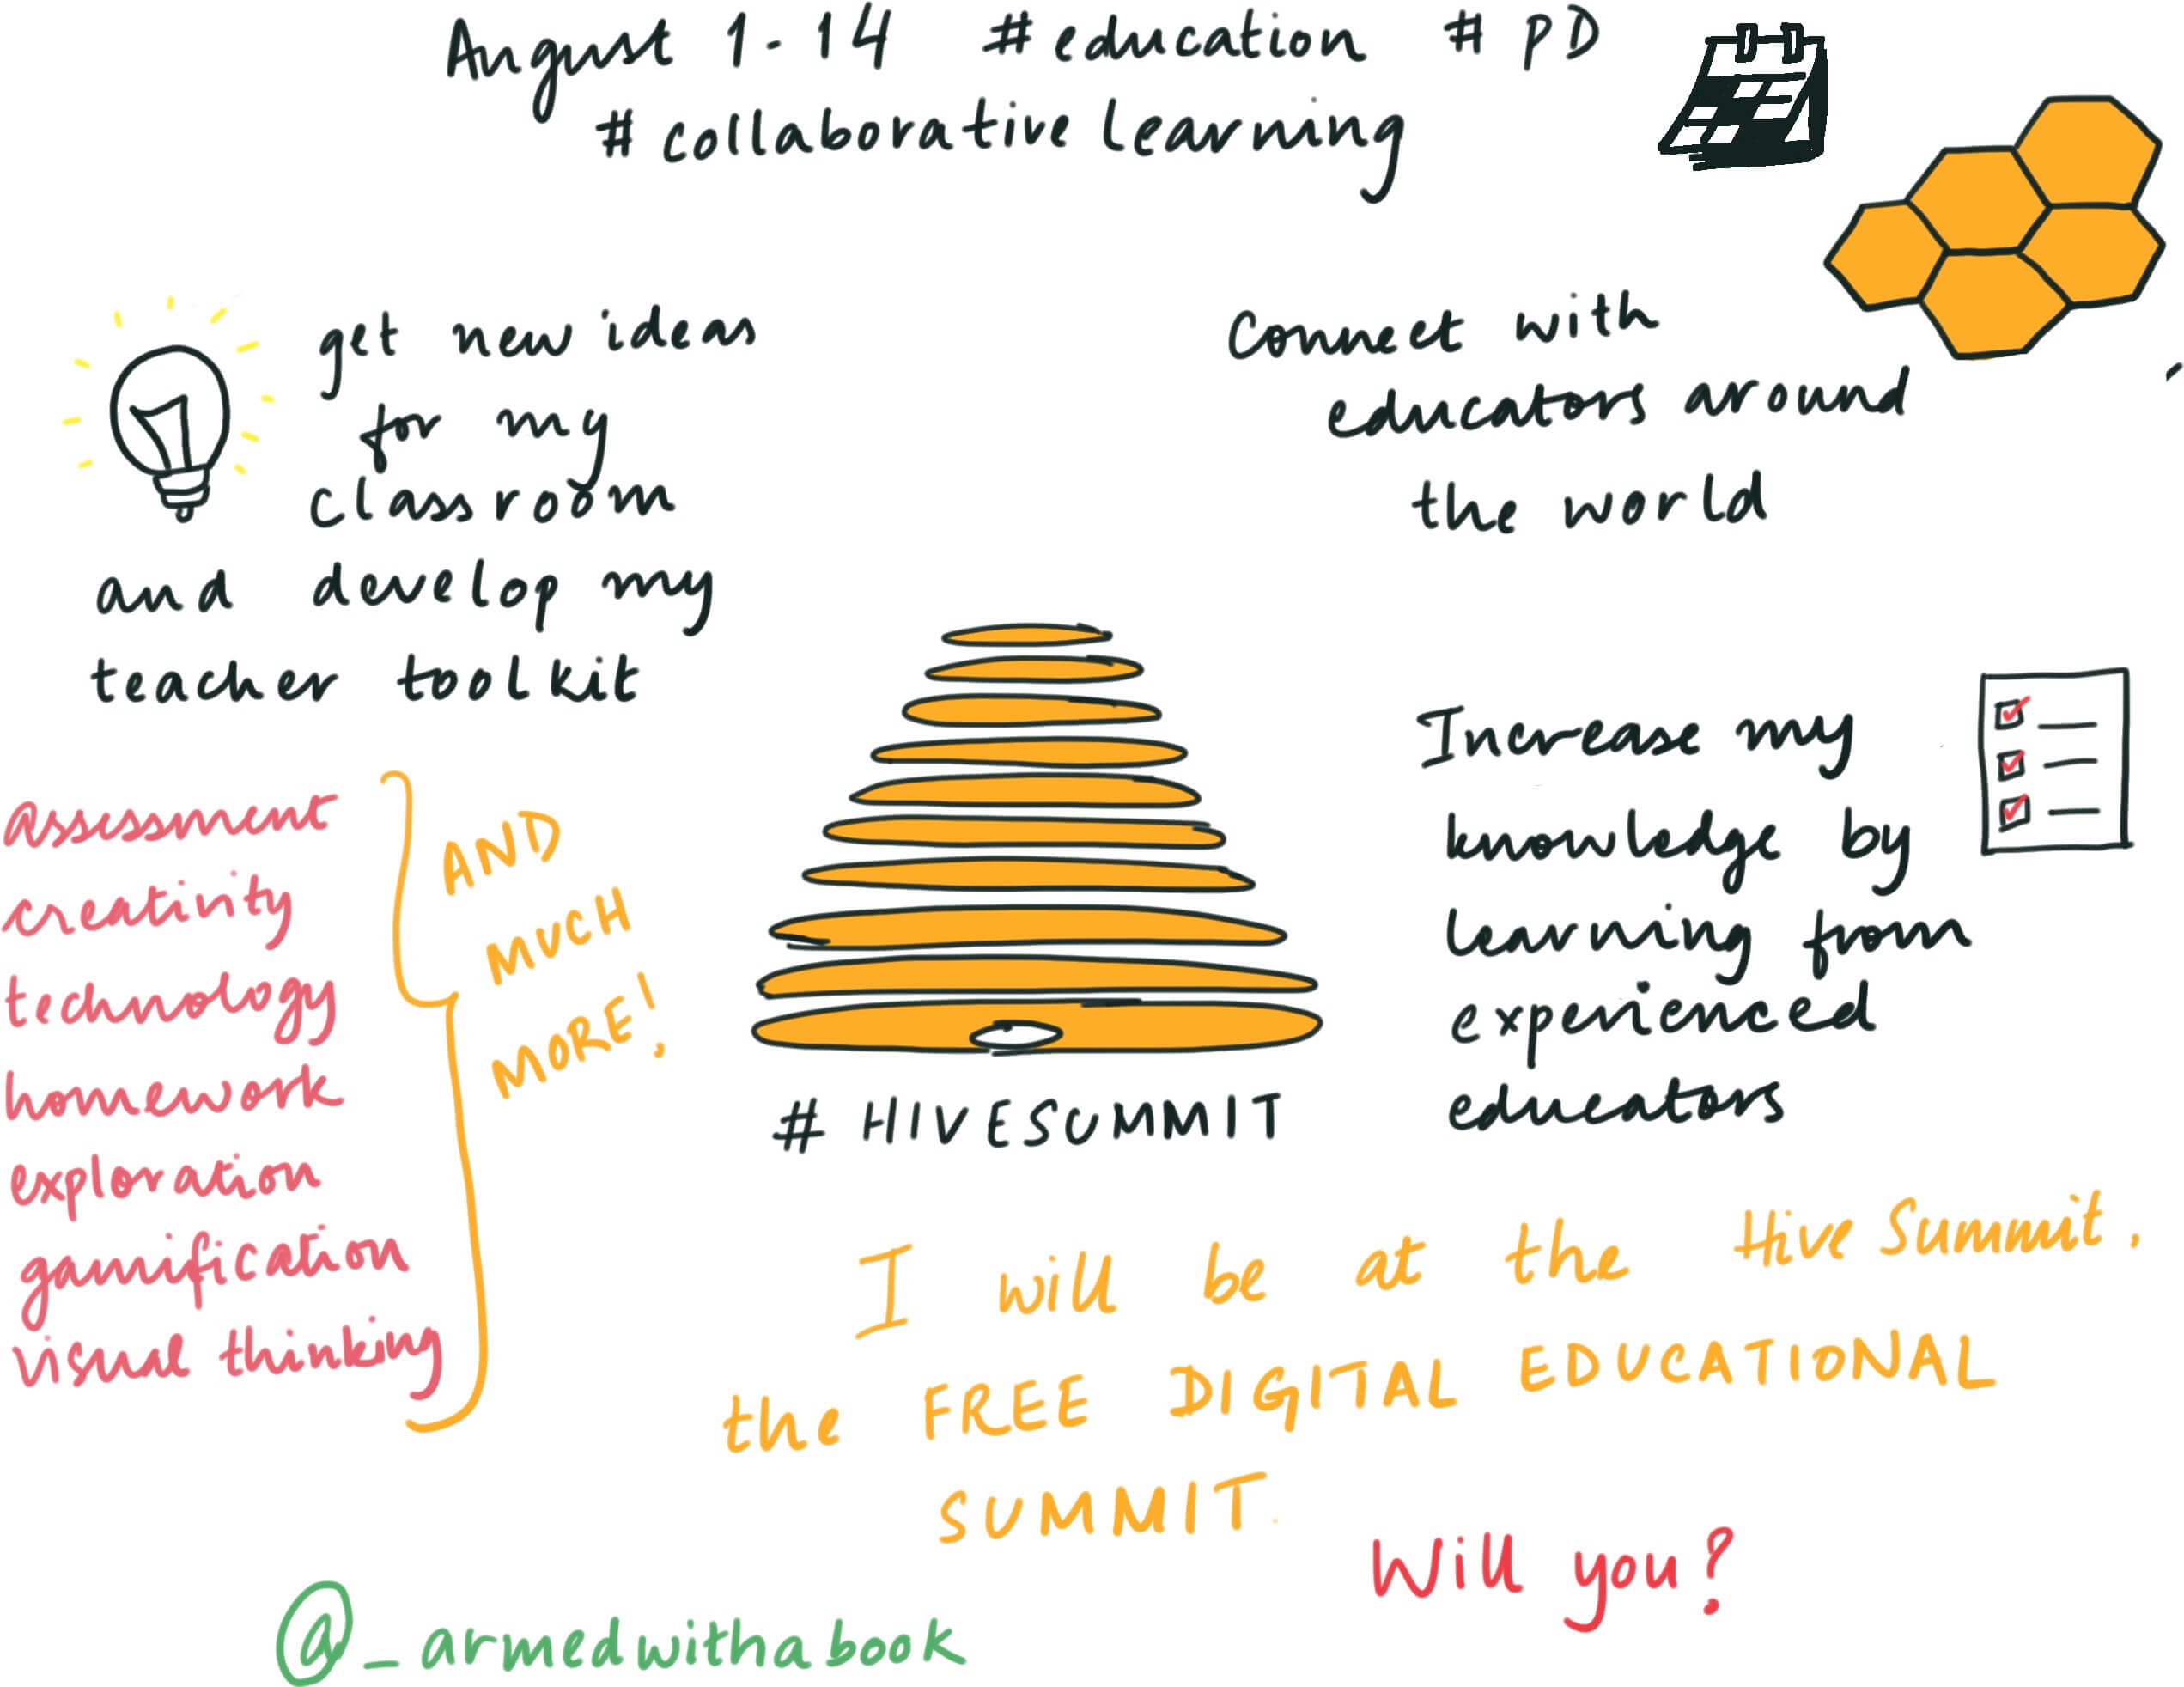 My first sketchnote was about the HiveSummit